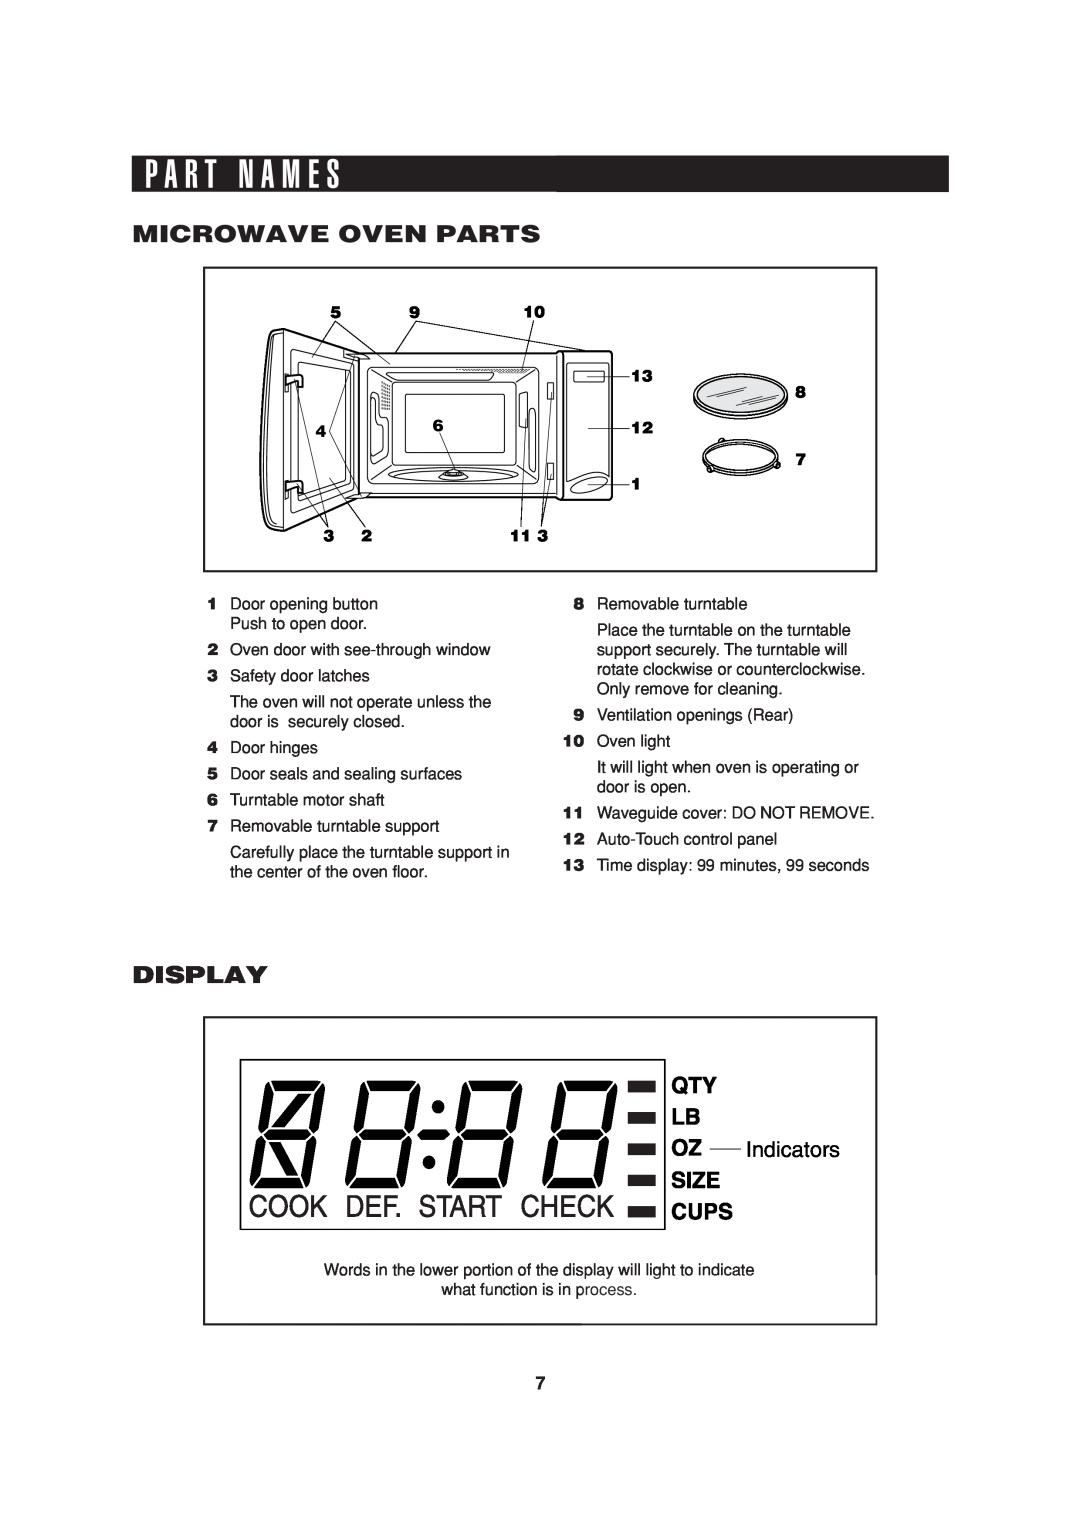 Sharp R-301F, R-316F, R-308F, R-314F, R-304F operation manual P A R T N A M E S, Microwave Oven Parts, Display, Indicators 